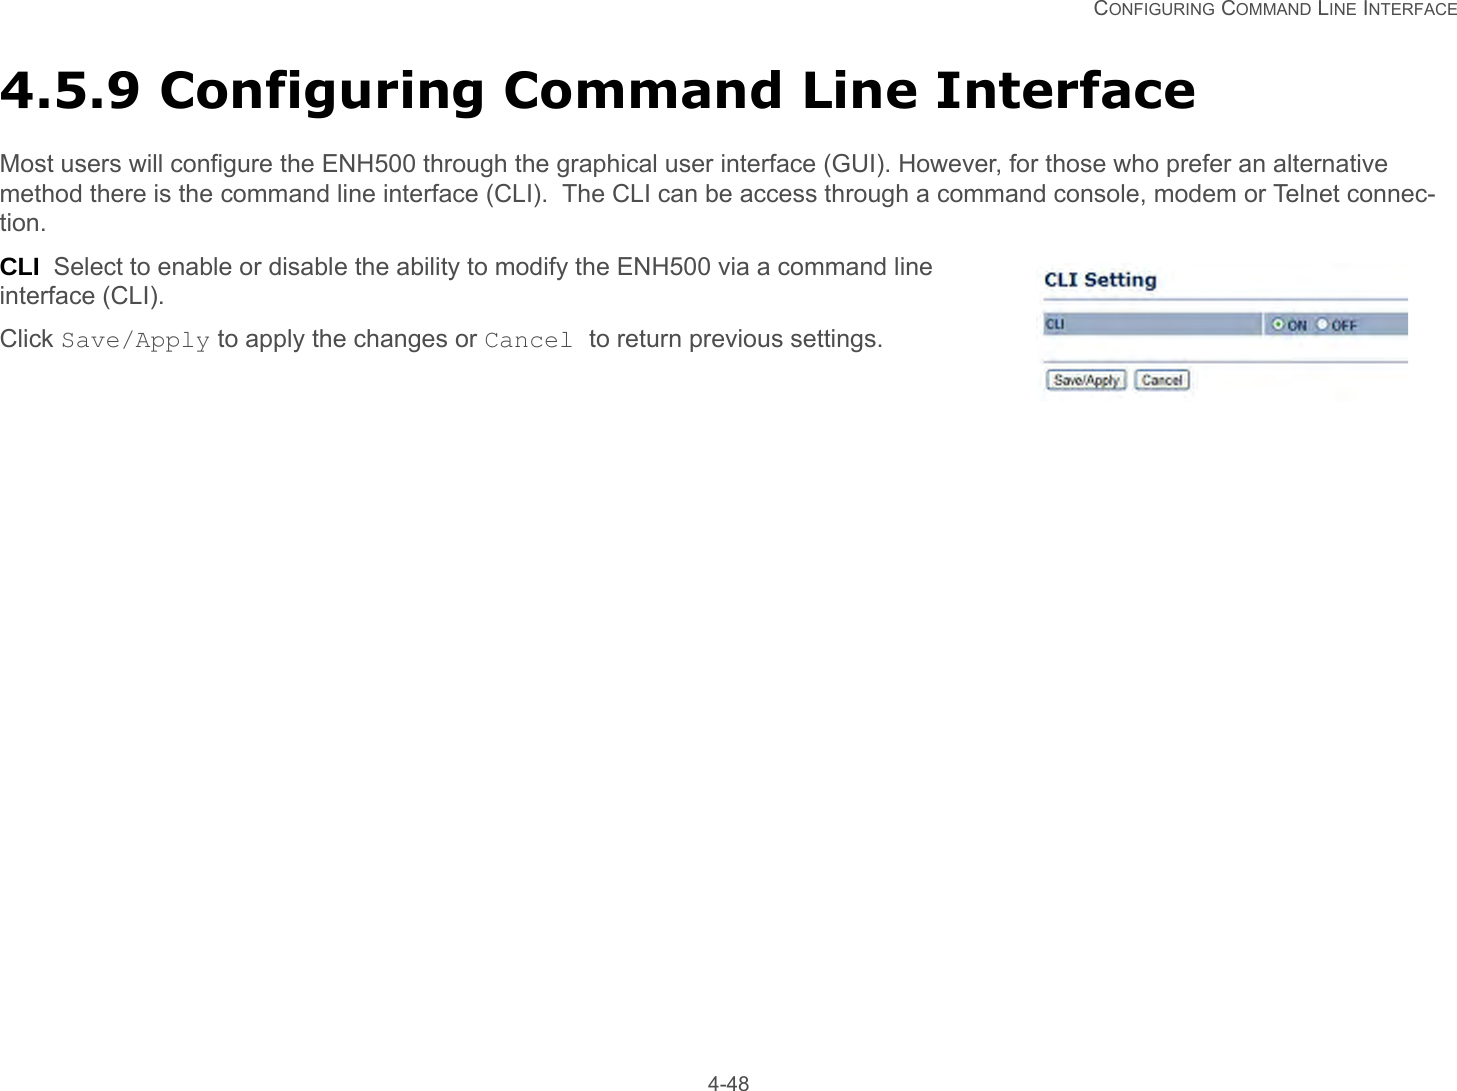   CONFIGURING COMMAND LINE INTERFACE 4-484.5.9 Configuring Command Line InterfaceMost users will configure the ENH500 through the graphical user interface (GUI). However, for those who prefer an alternative method there is the command line interface (CLI).  The CLI can be access through a command console, modem or Telnet connec-tion.CLI  Select to enable or disable the ability to modify the ENH500 via a command line interface (CLI).Click Save/Apply to apply the changes or Cancel to return previous settings.